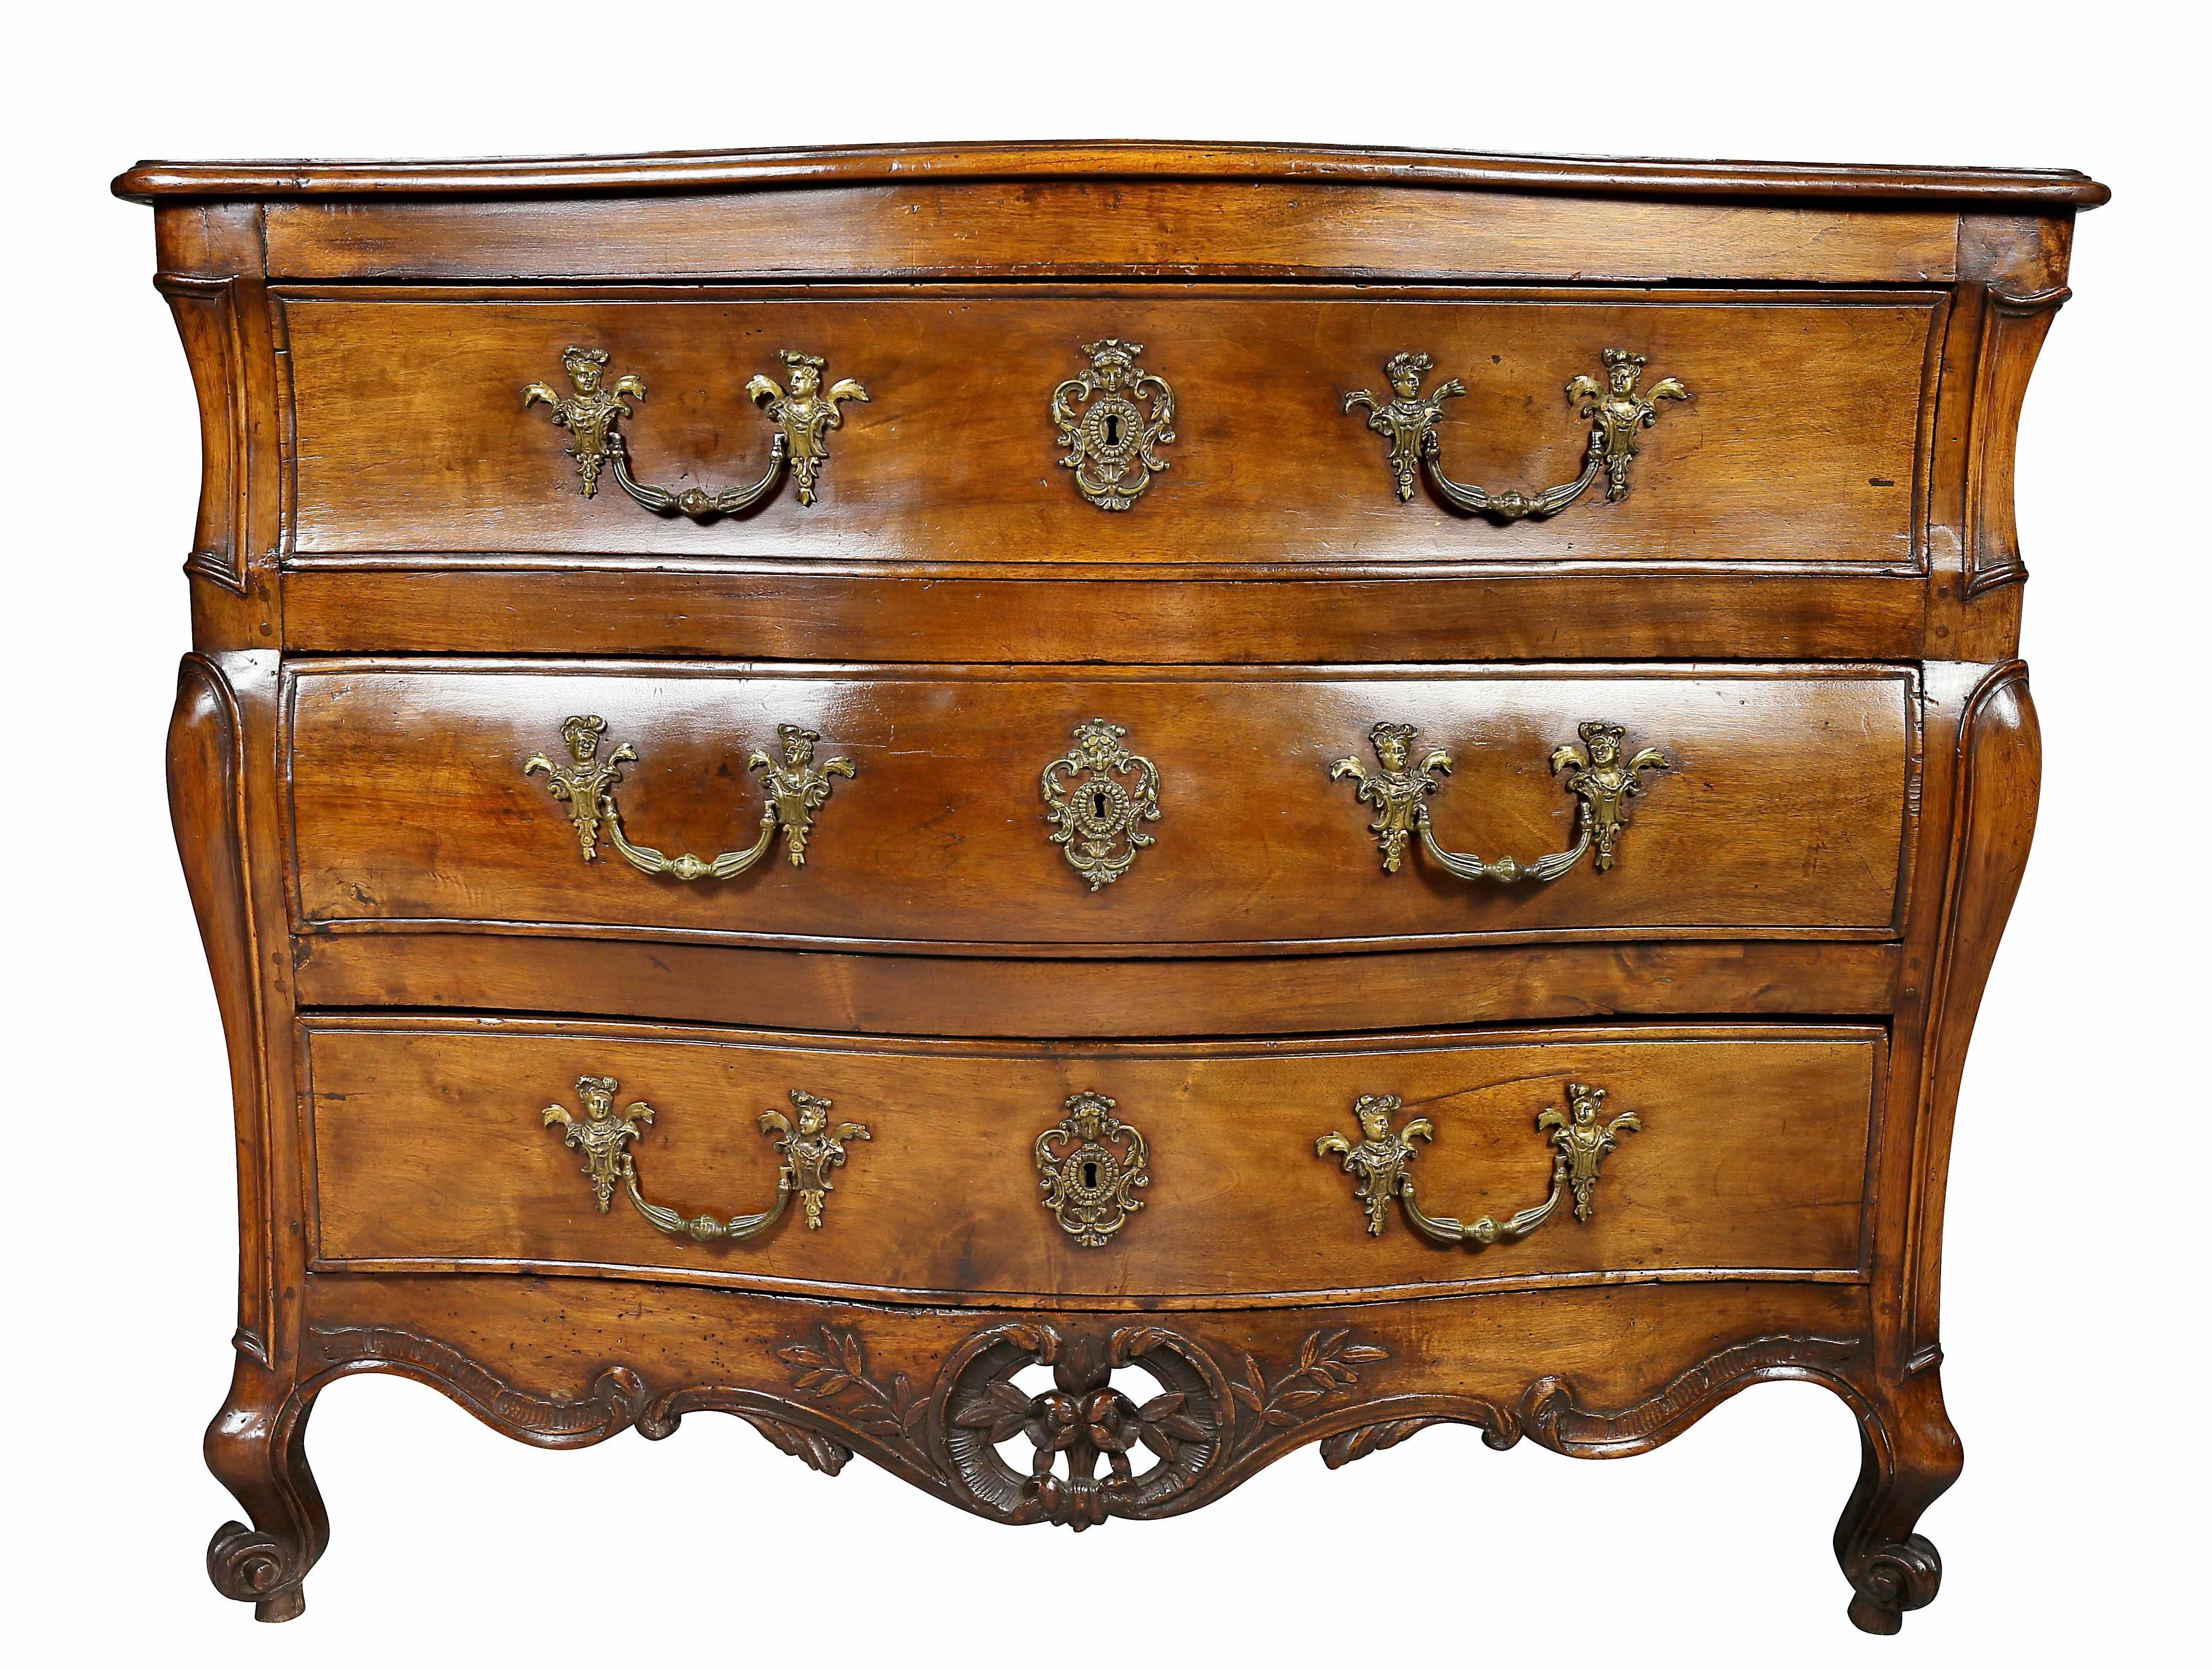 With serpentine top over three drawers with original handles and a carved floral pierced apron raised on carved scrolled feet. Provenance; Fogg Estate, Chestnut Hill, Mass.